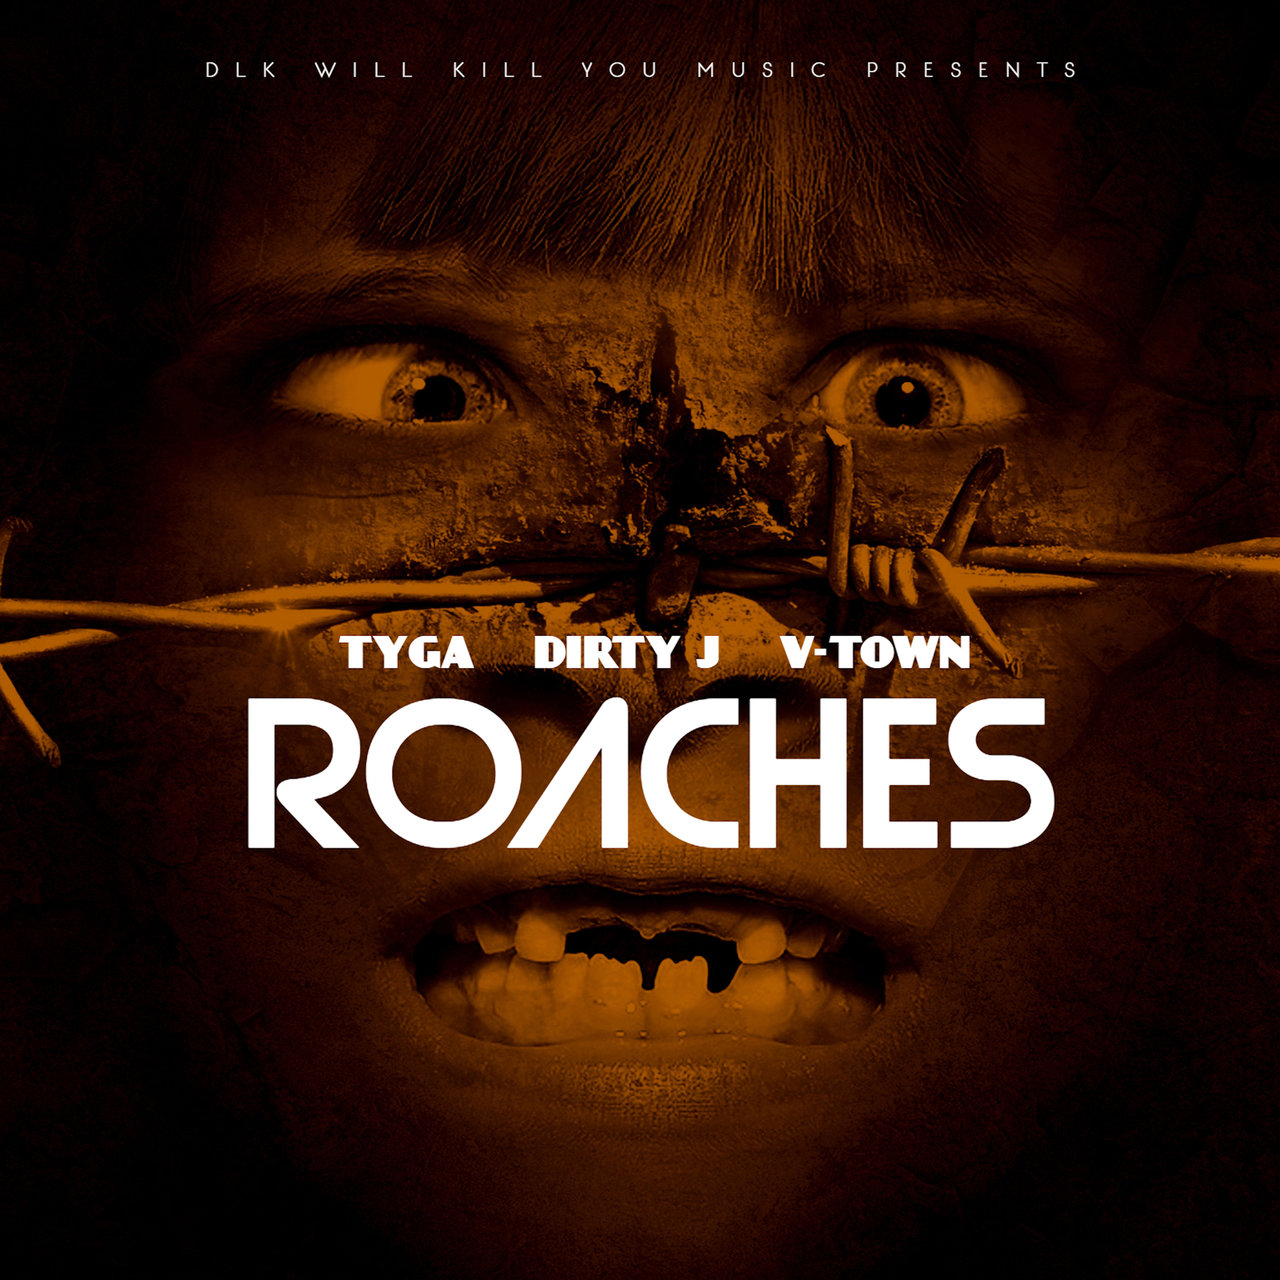 Tyga, Dirty J and V-Town - Roaches (Cover)